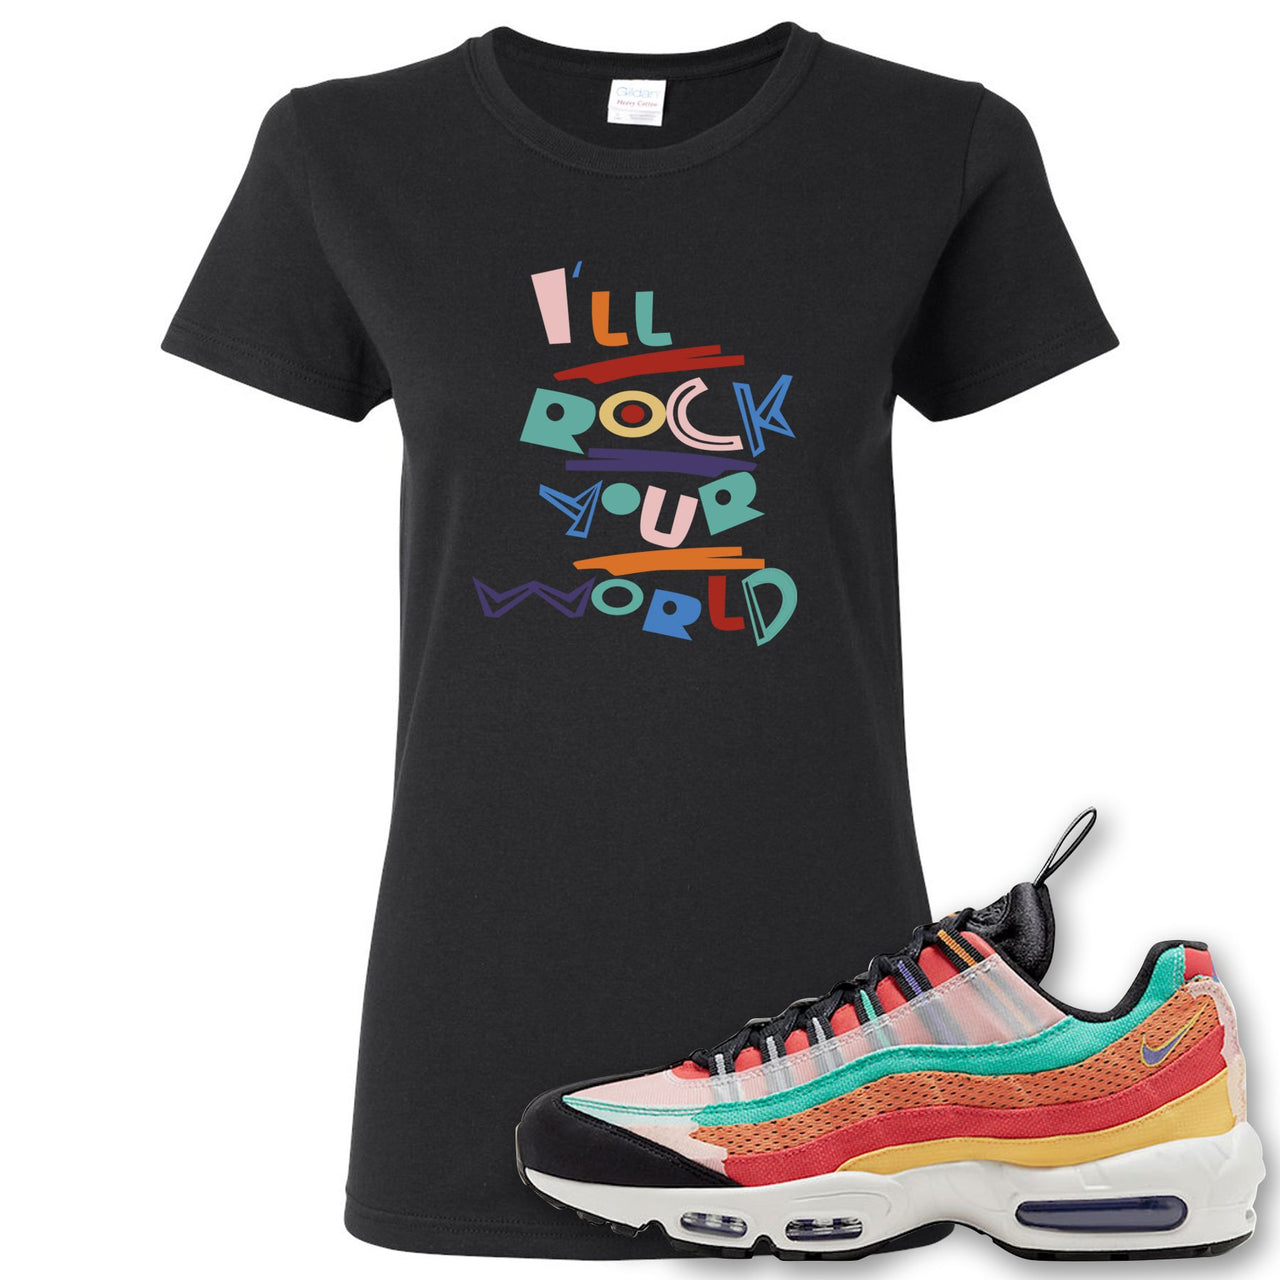 Air Max 95 Black History Month Sneaker Black Women's T Shirt | Women's Tees to match Nike Air Max 95 Black History Month Shoes | I'll Rock Your World